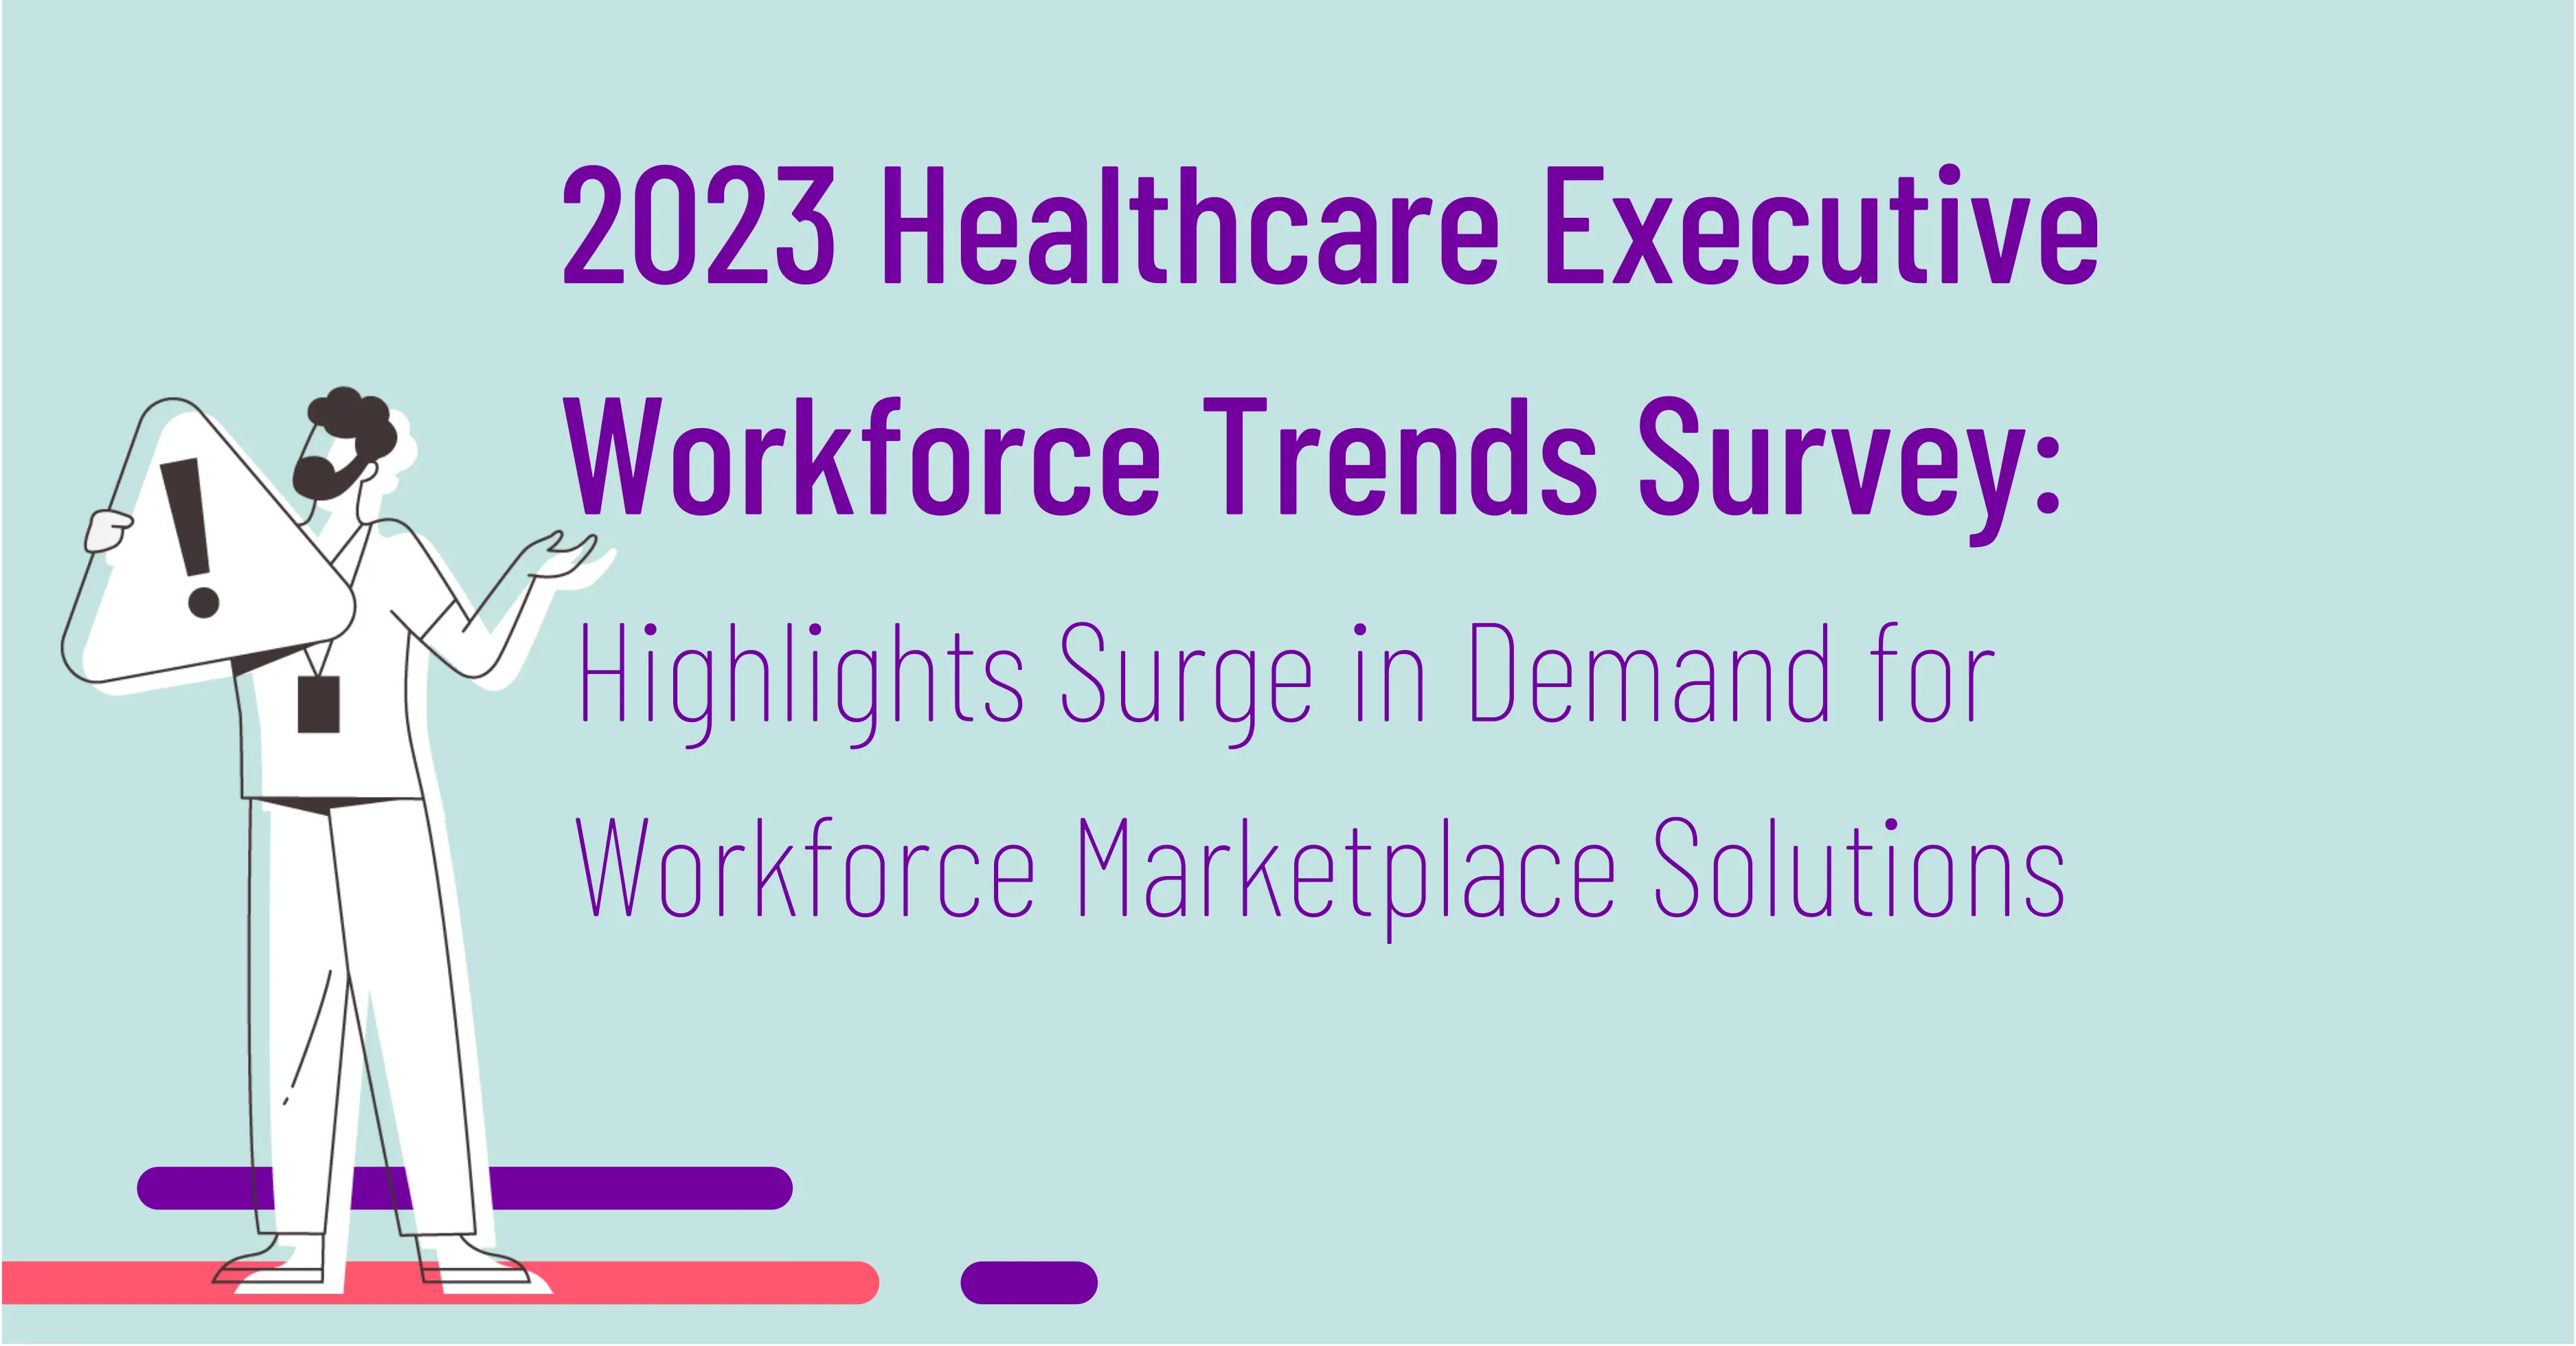 2023 Healthcare Executive Workforce Trends Survey: Highlights surge in demand for workforce marketplace solutions